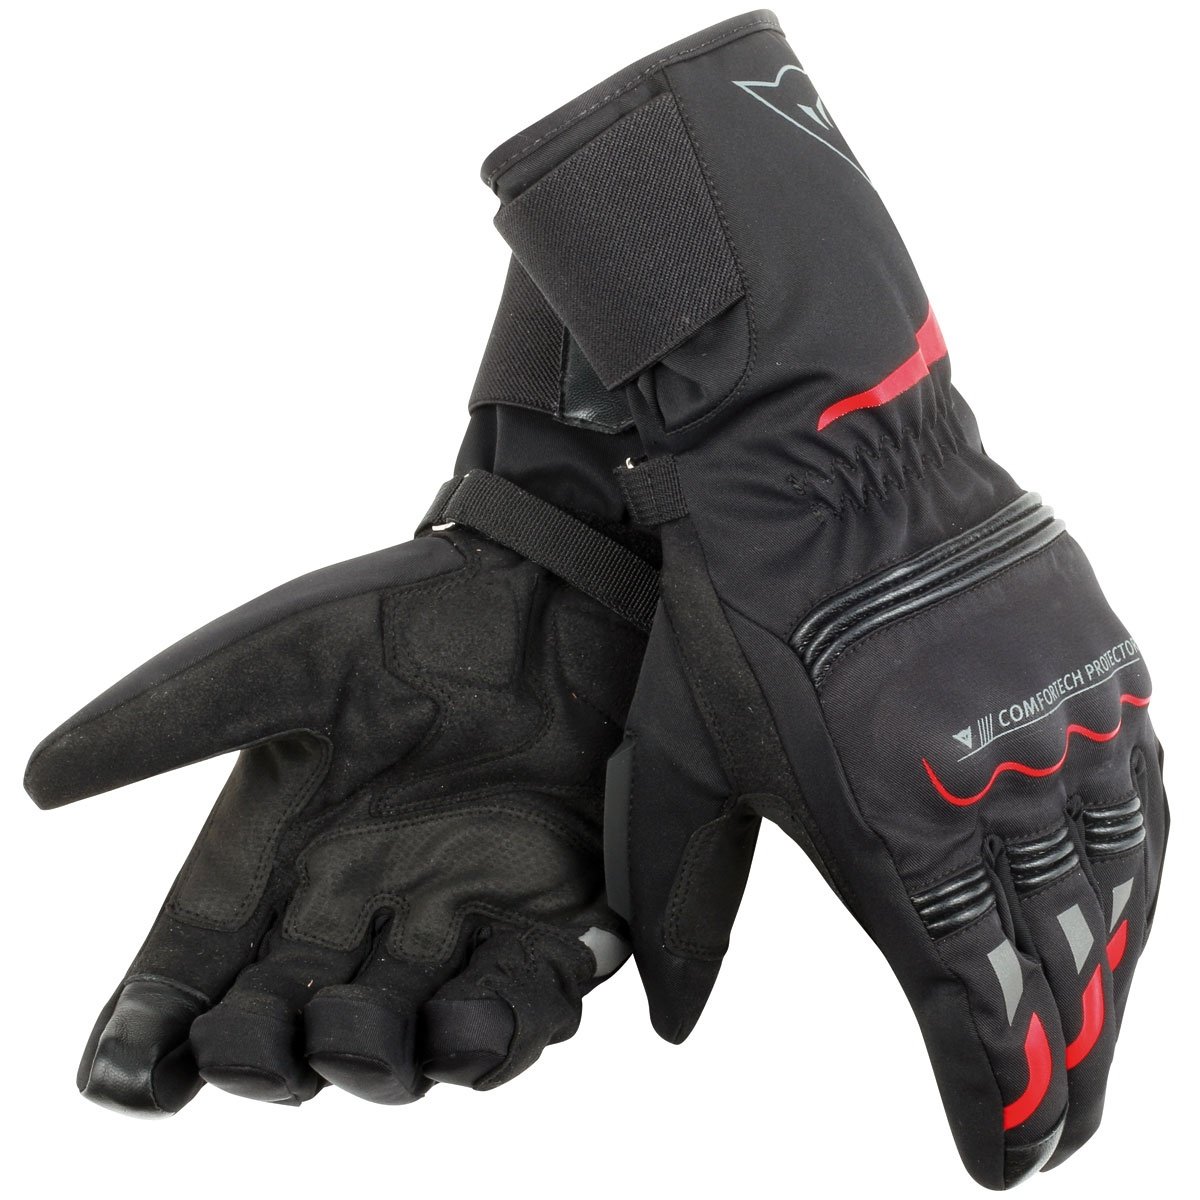 Image of Dainese Tempest Unisex D-Dry Black Red Long Size XXXS ID 8052644633627